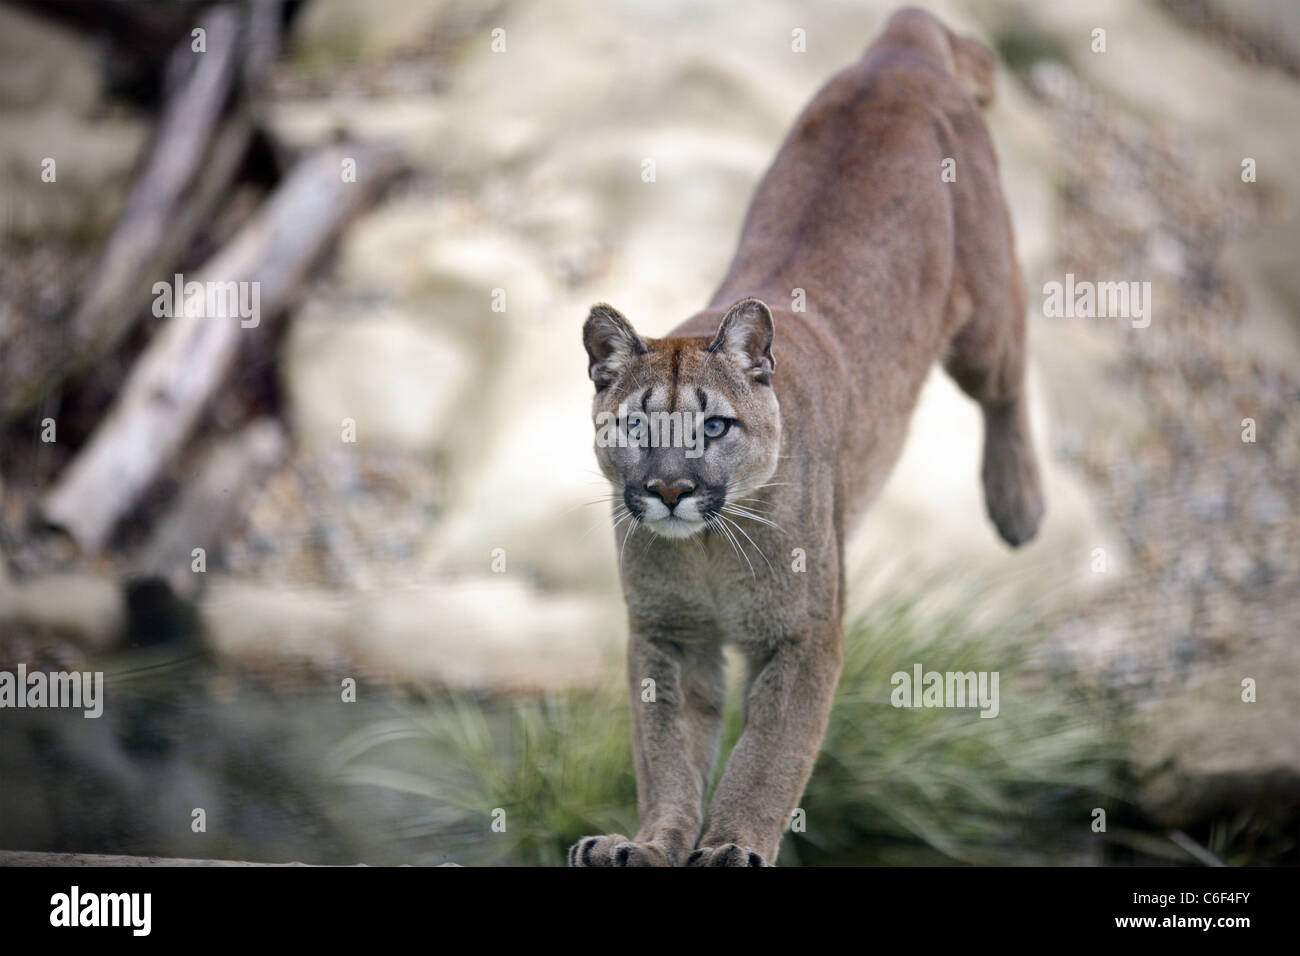 A puma leaping and catching food Stock Photo